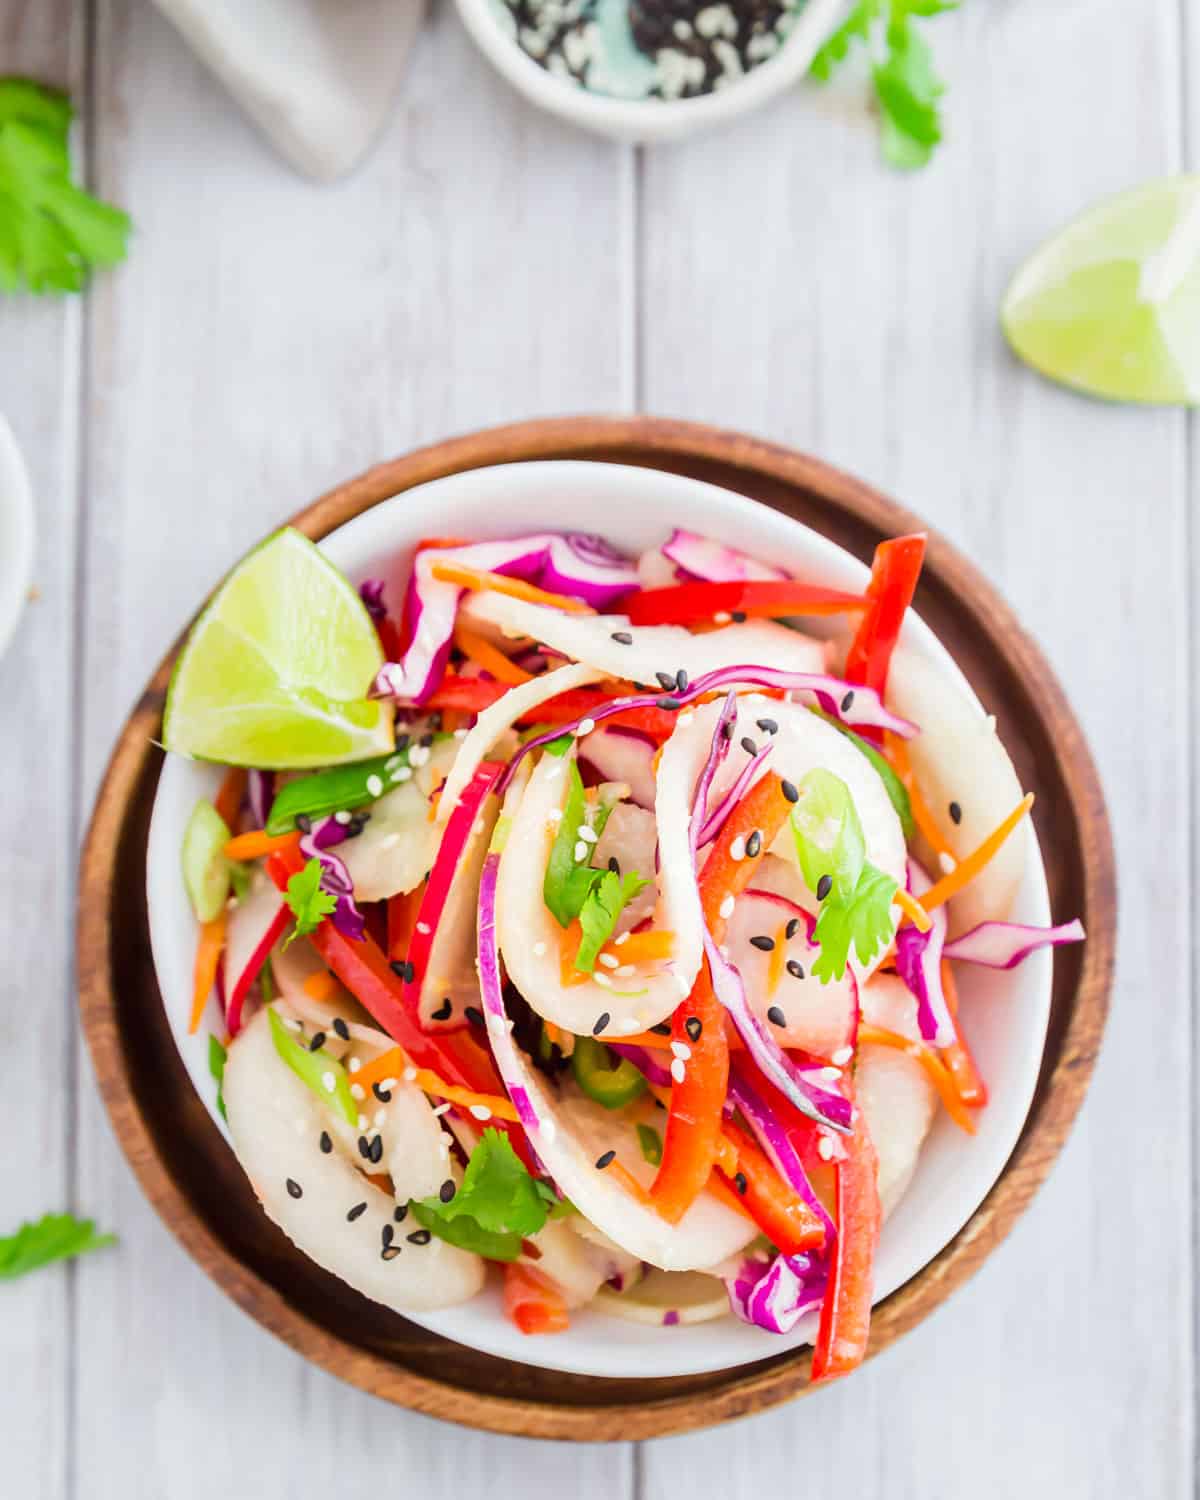 Make kohlrabi noodles by spiralizing the whole vegetable and then tossing with fresh vegetables in this easy Thai salad.